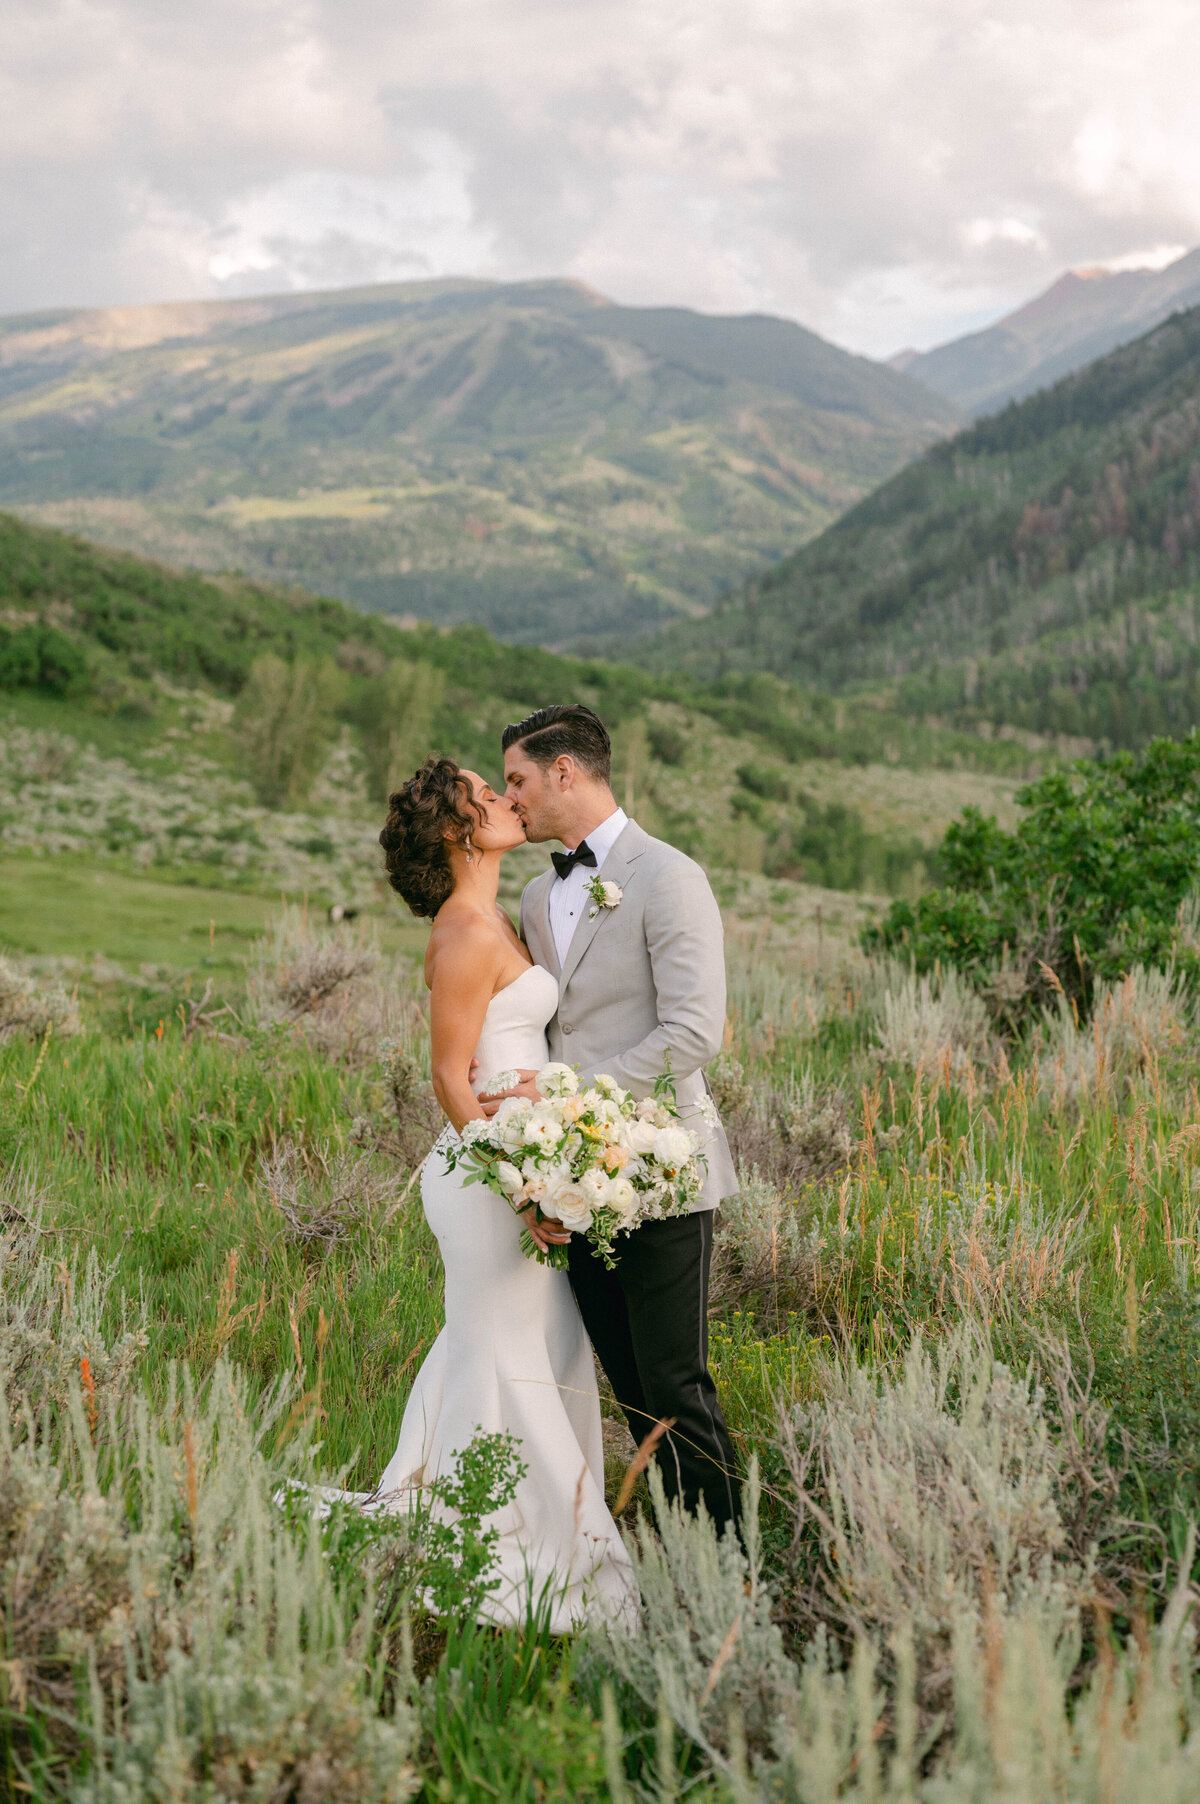 Lia-Ross-Aspen-Snowmass-Patak-Ranch-Wedding-Photography-by-Jacie-Marguerite-752